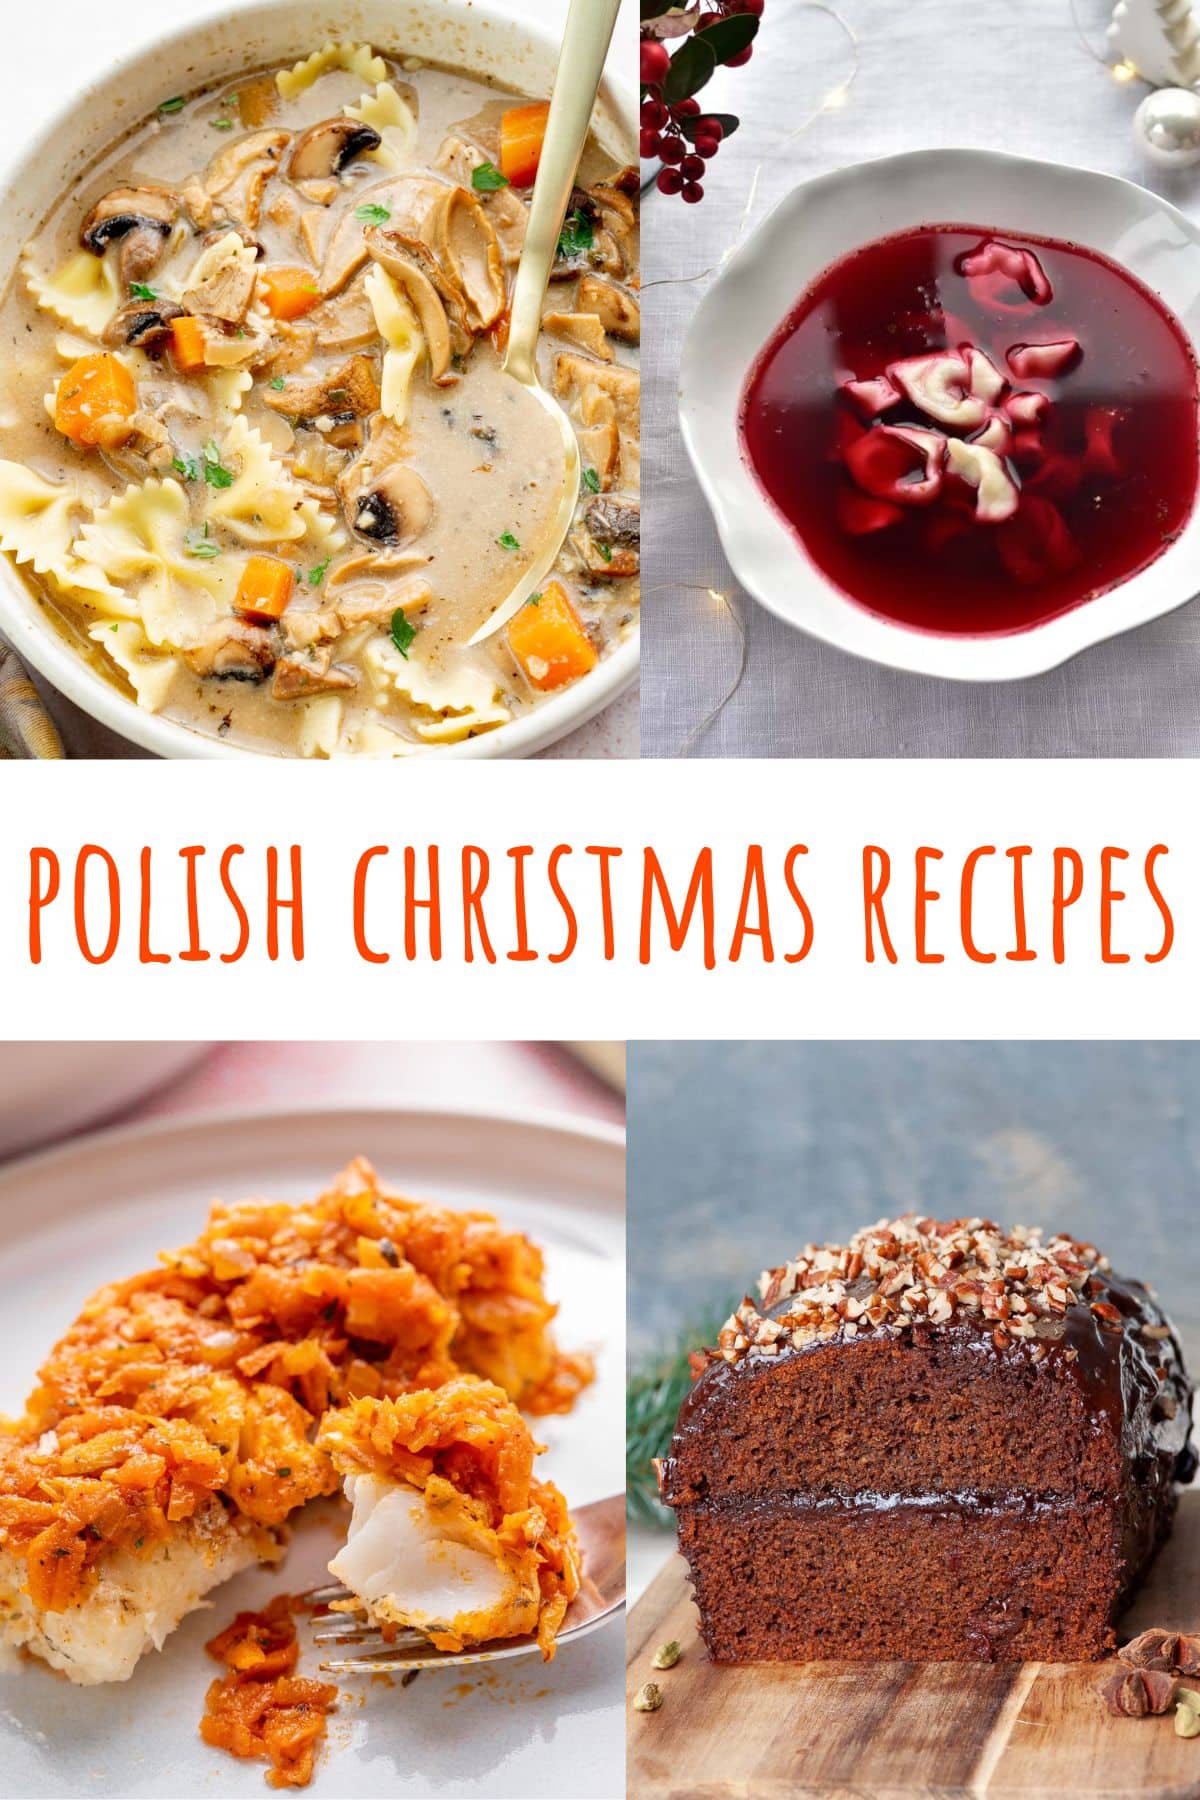 A collage of 4 photos showing Polish Christmas recipes.